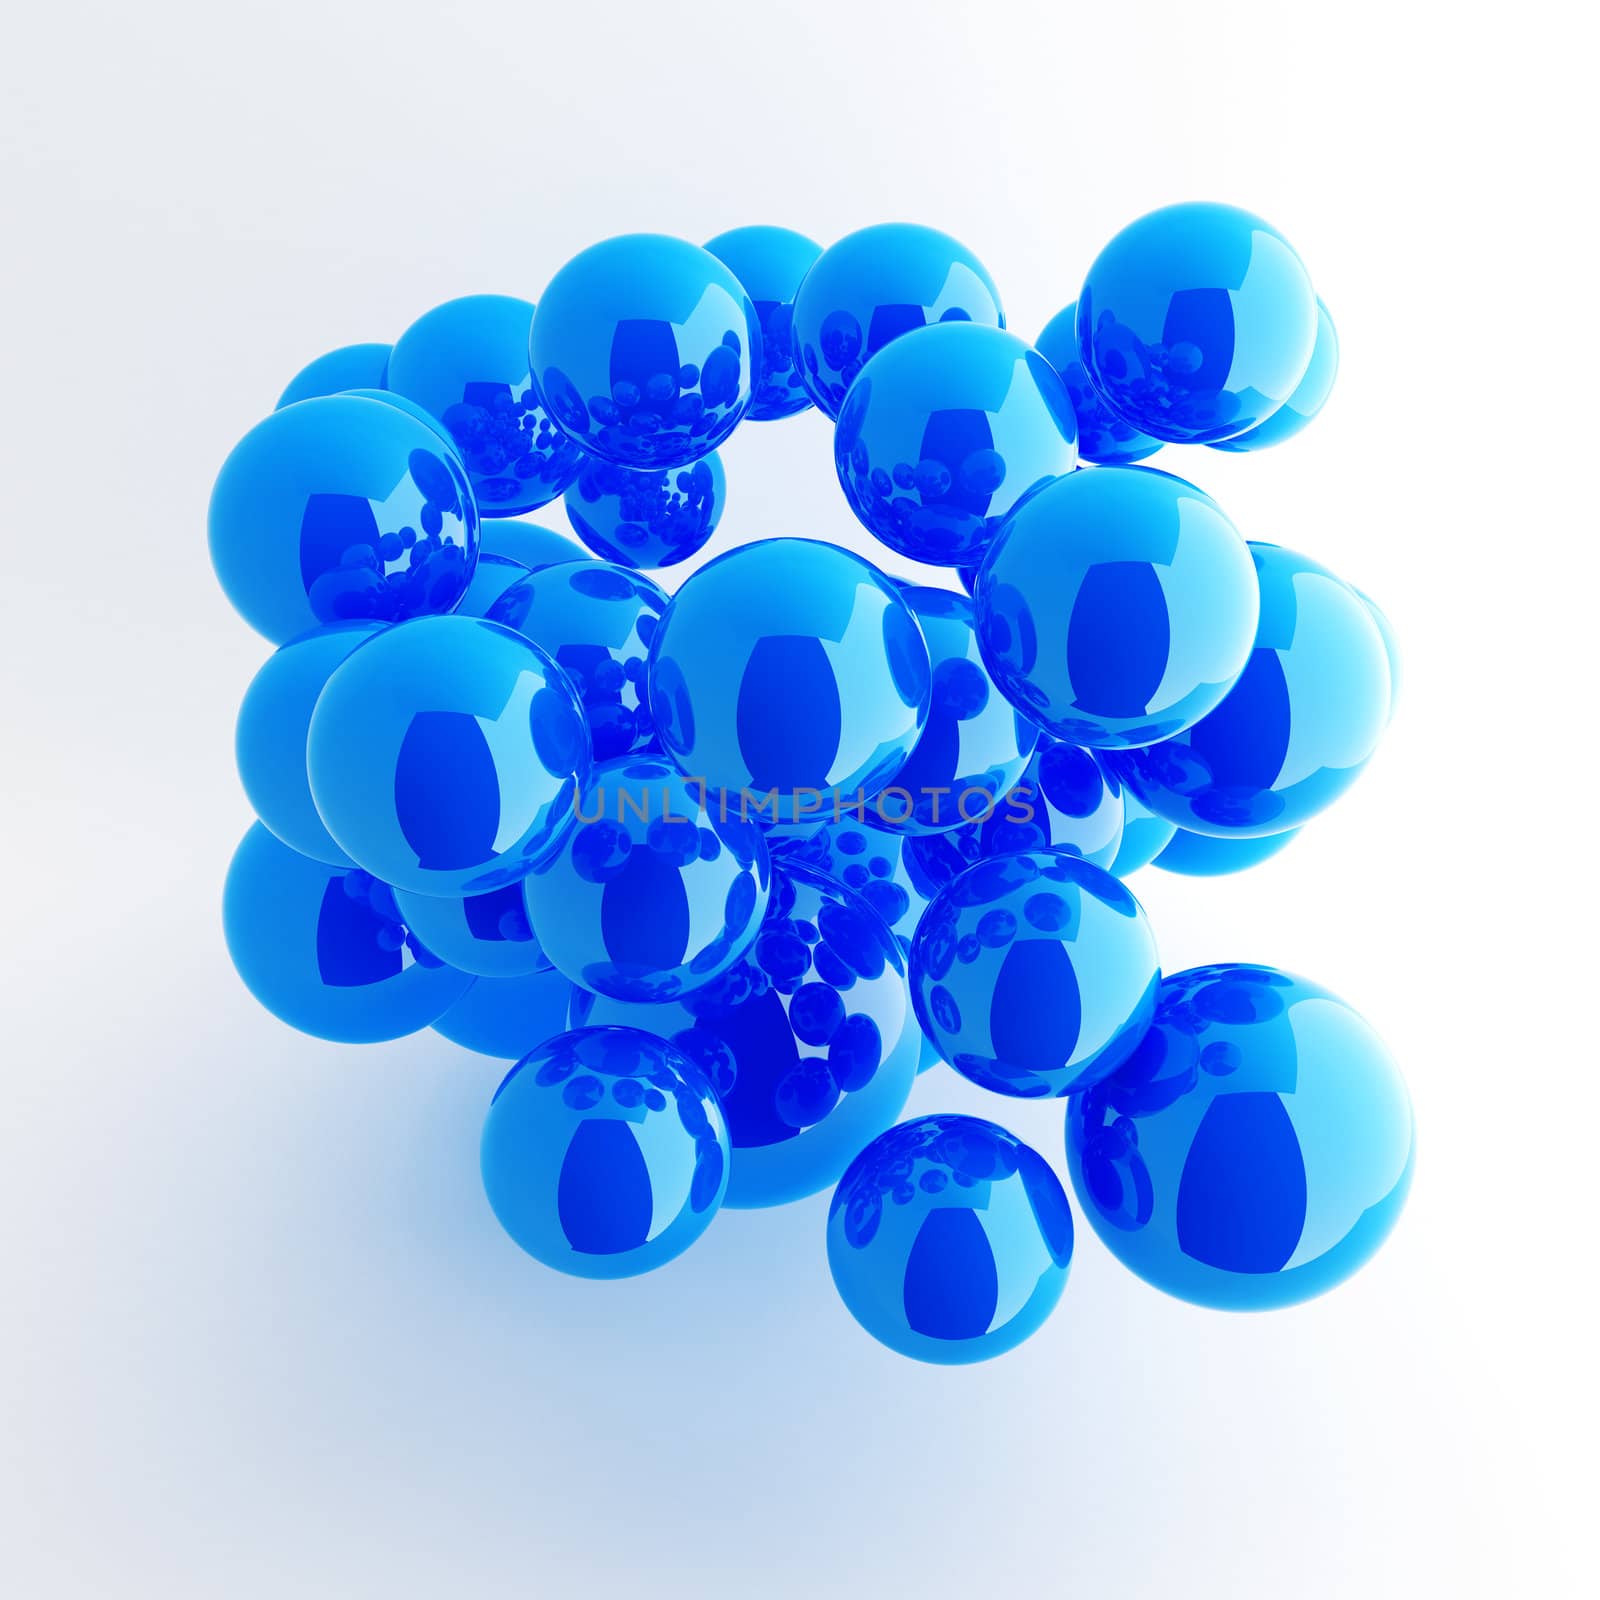 abstract background from bright blue shiny balls